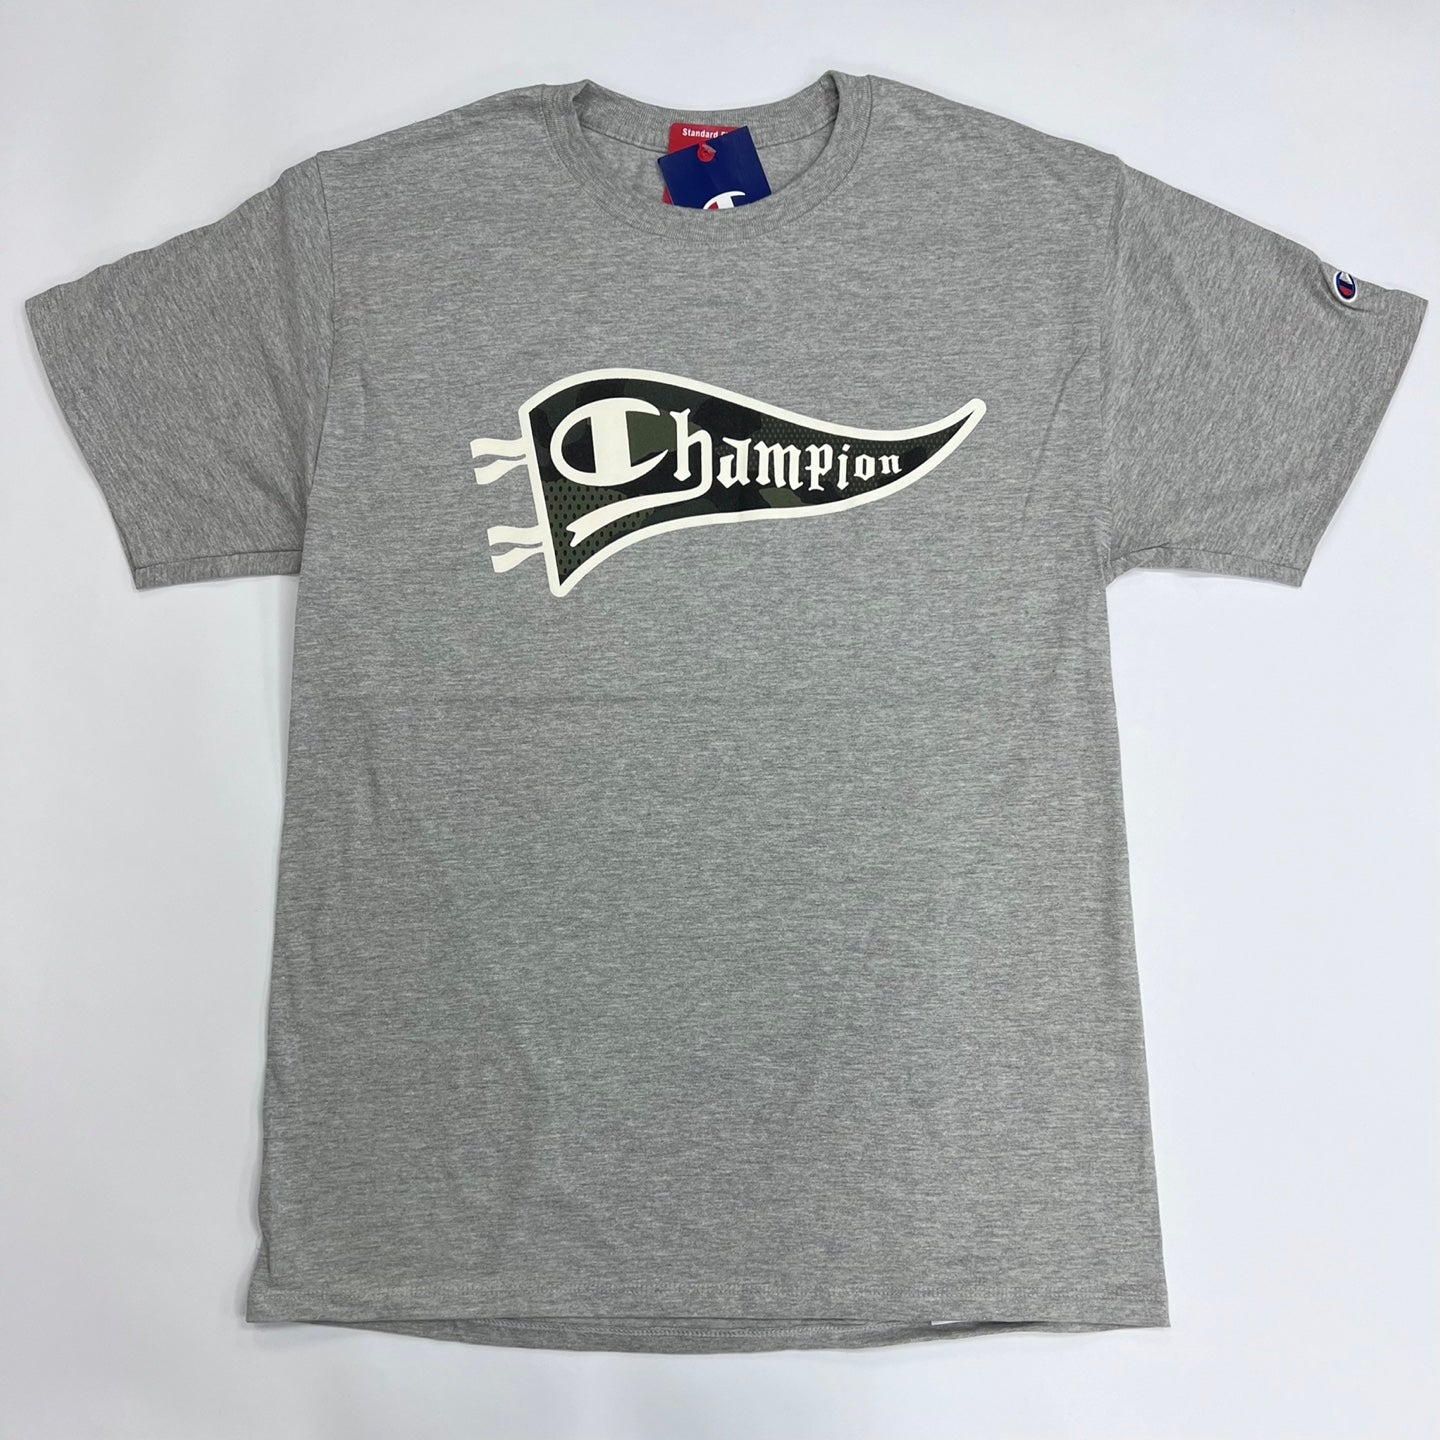 Champion Classic Graphic Patchwork MOMO – Pennant Tee, K